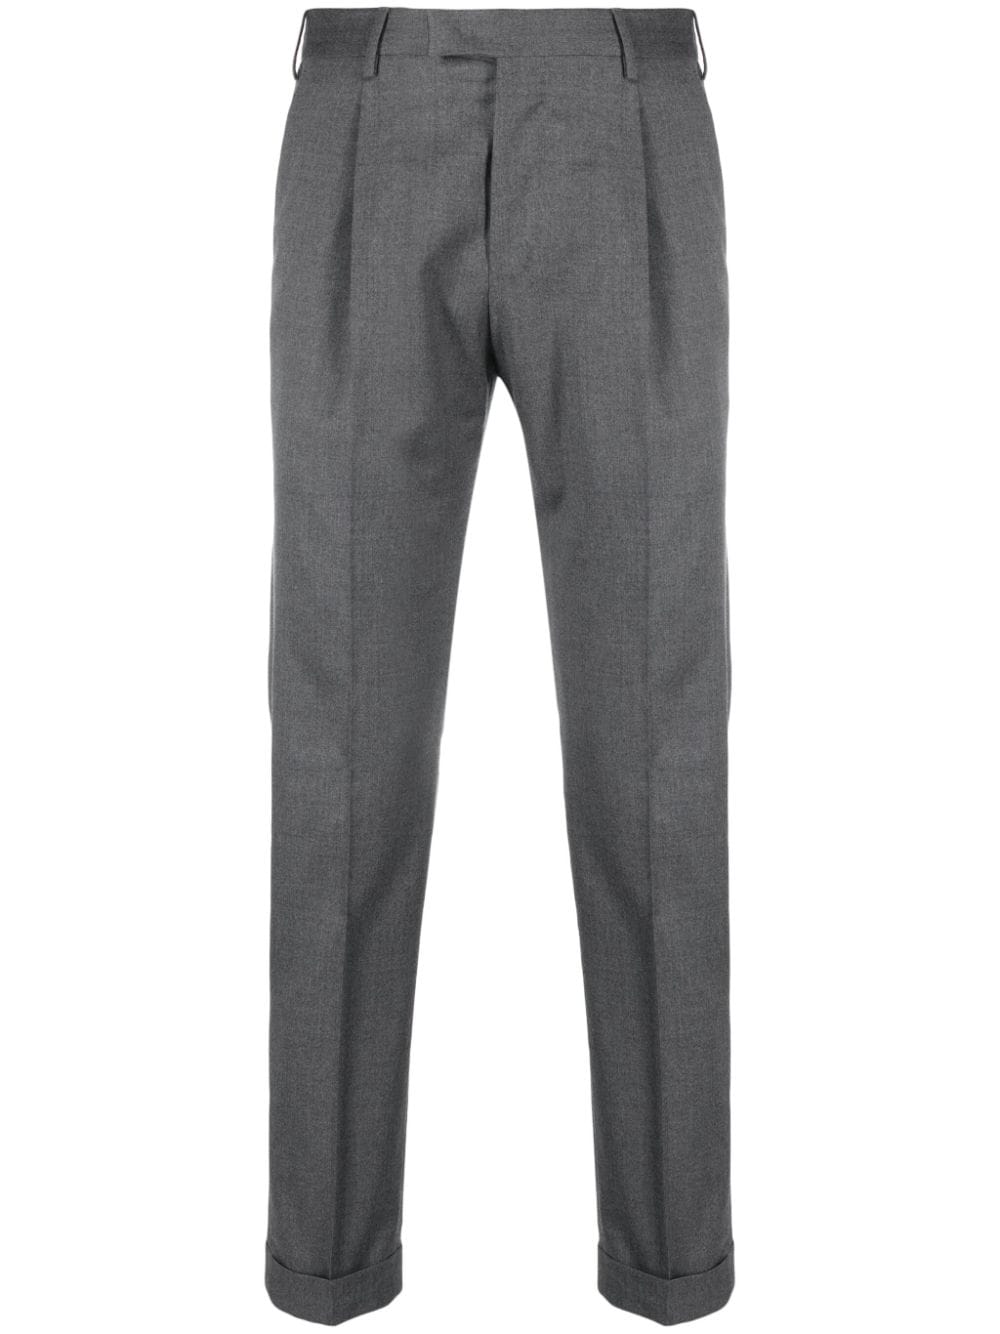 PT Torino low-rise tapered tailored trousers - Grey von PT Torino